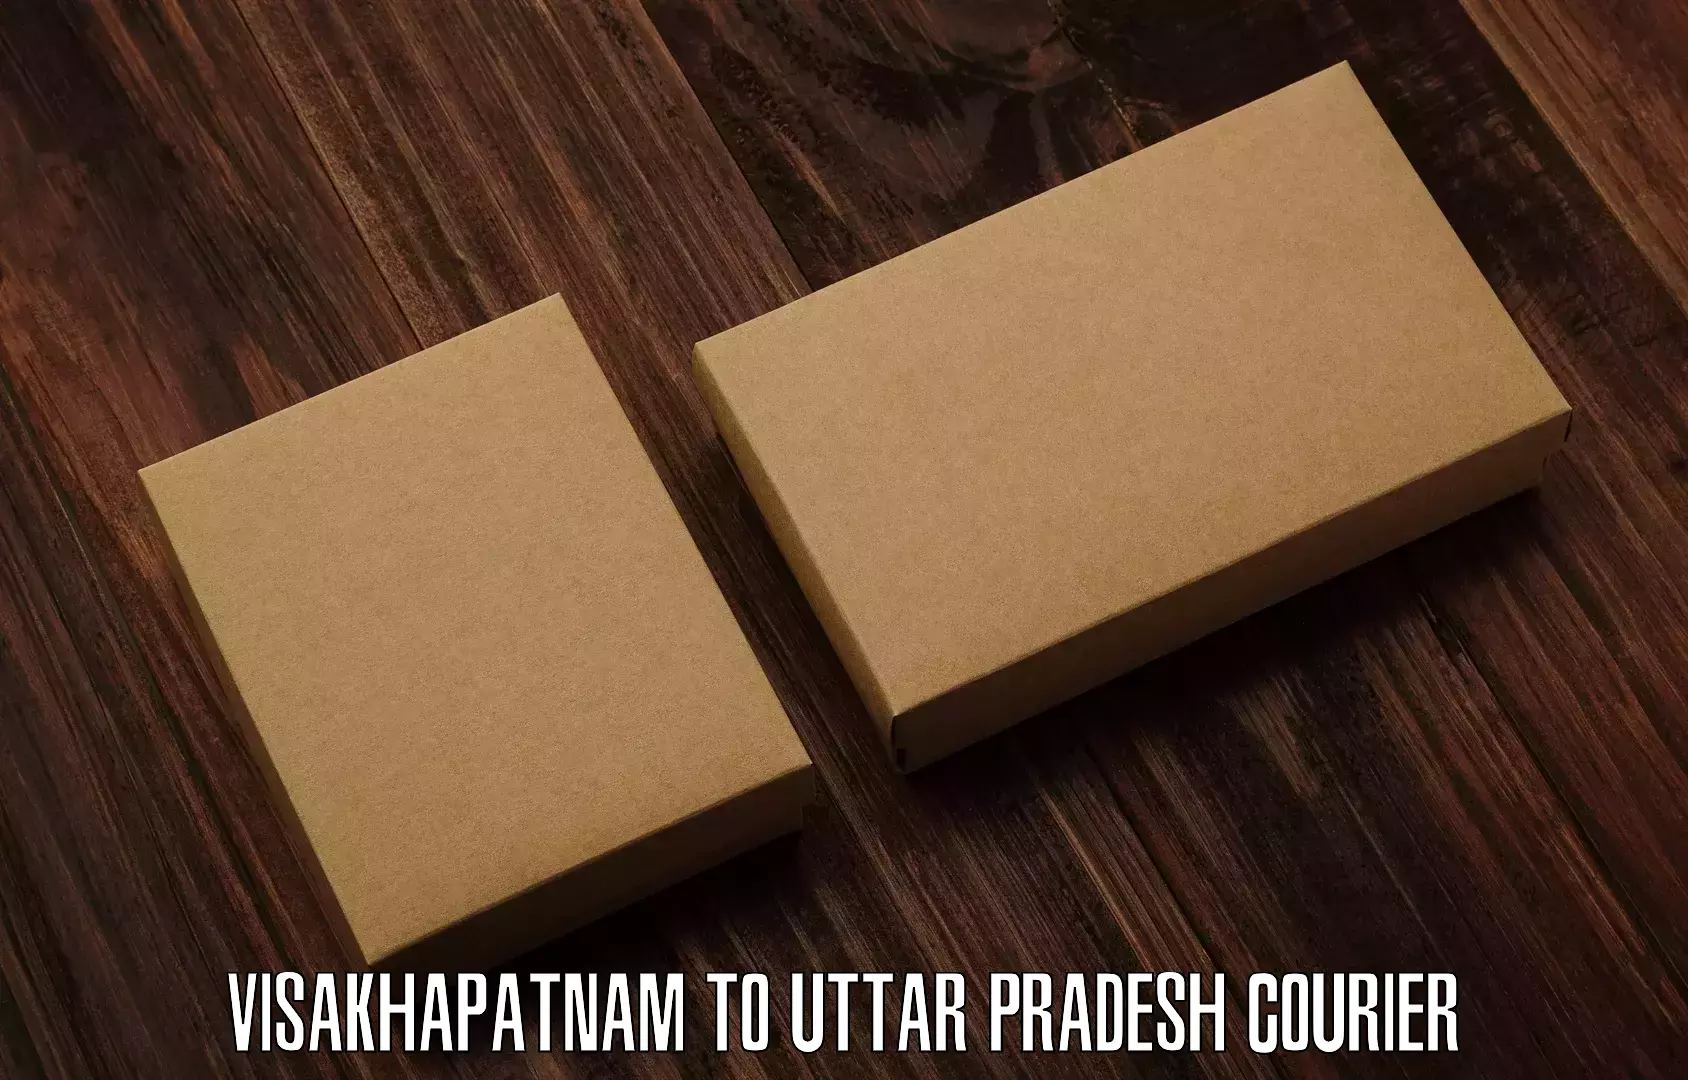 Multi-city courier Visakhapatnam to Agra